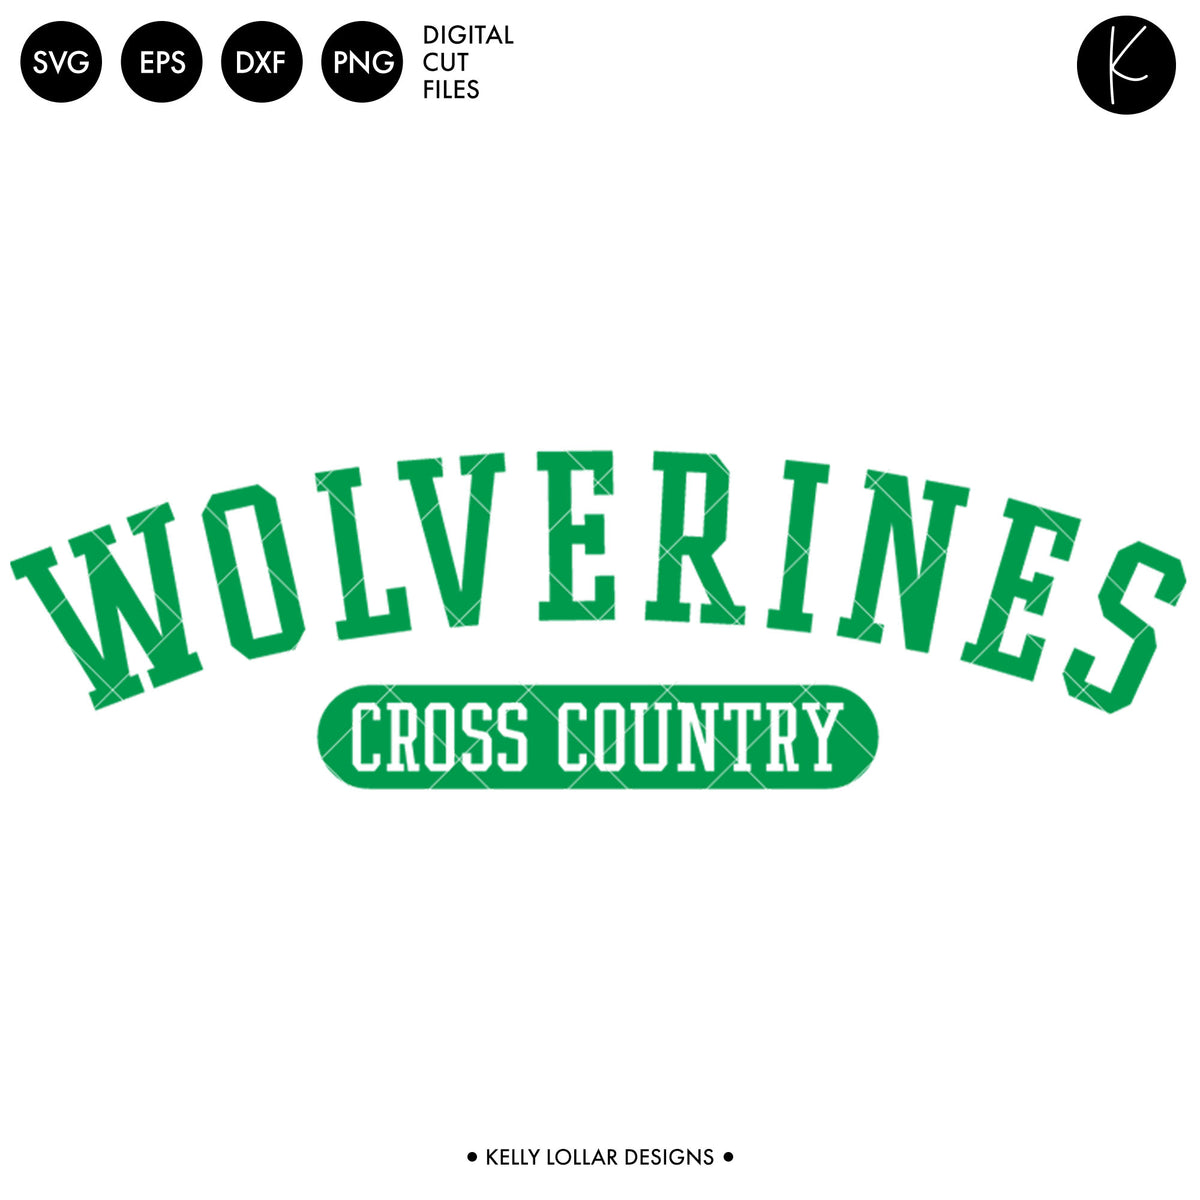 Wolverines Cross Country Bundle | SVG DXF EPS PNG Cut Files